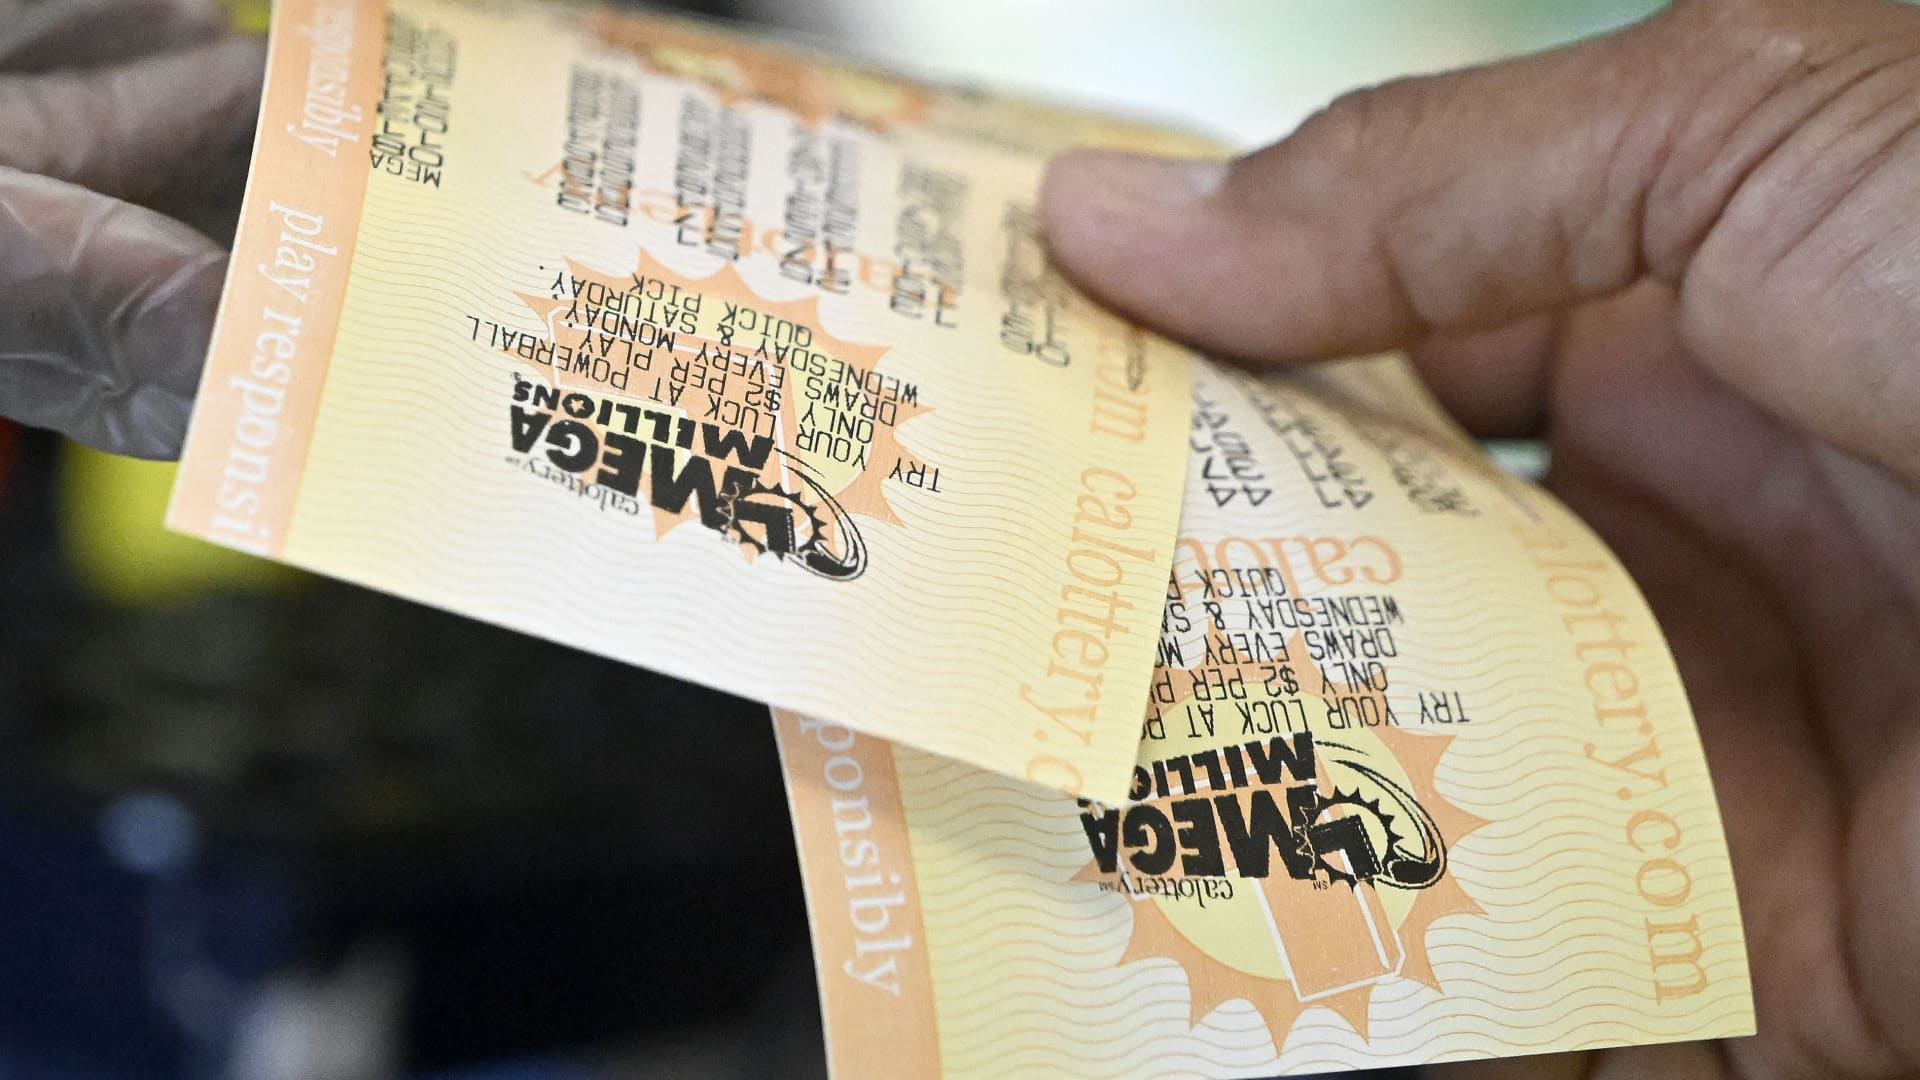 3rd largest US lottery jackpot ever